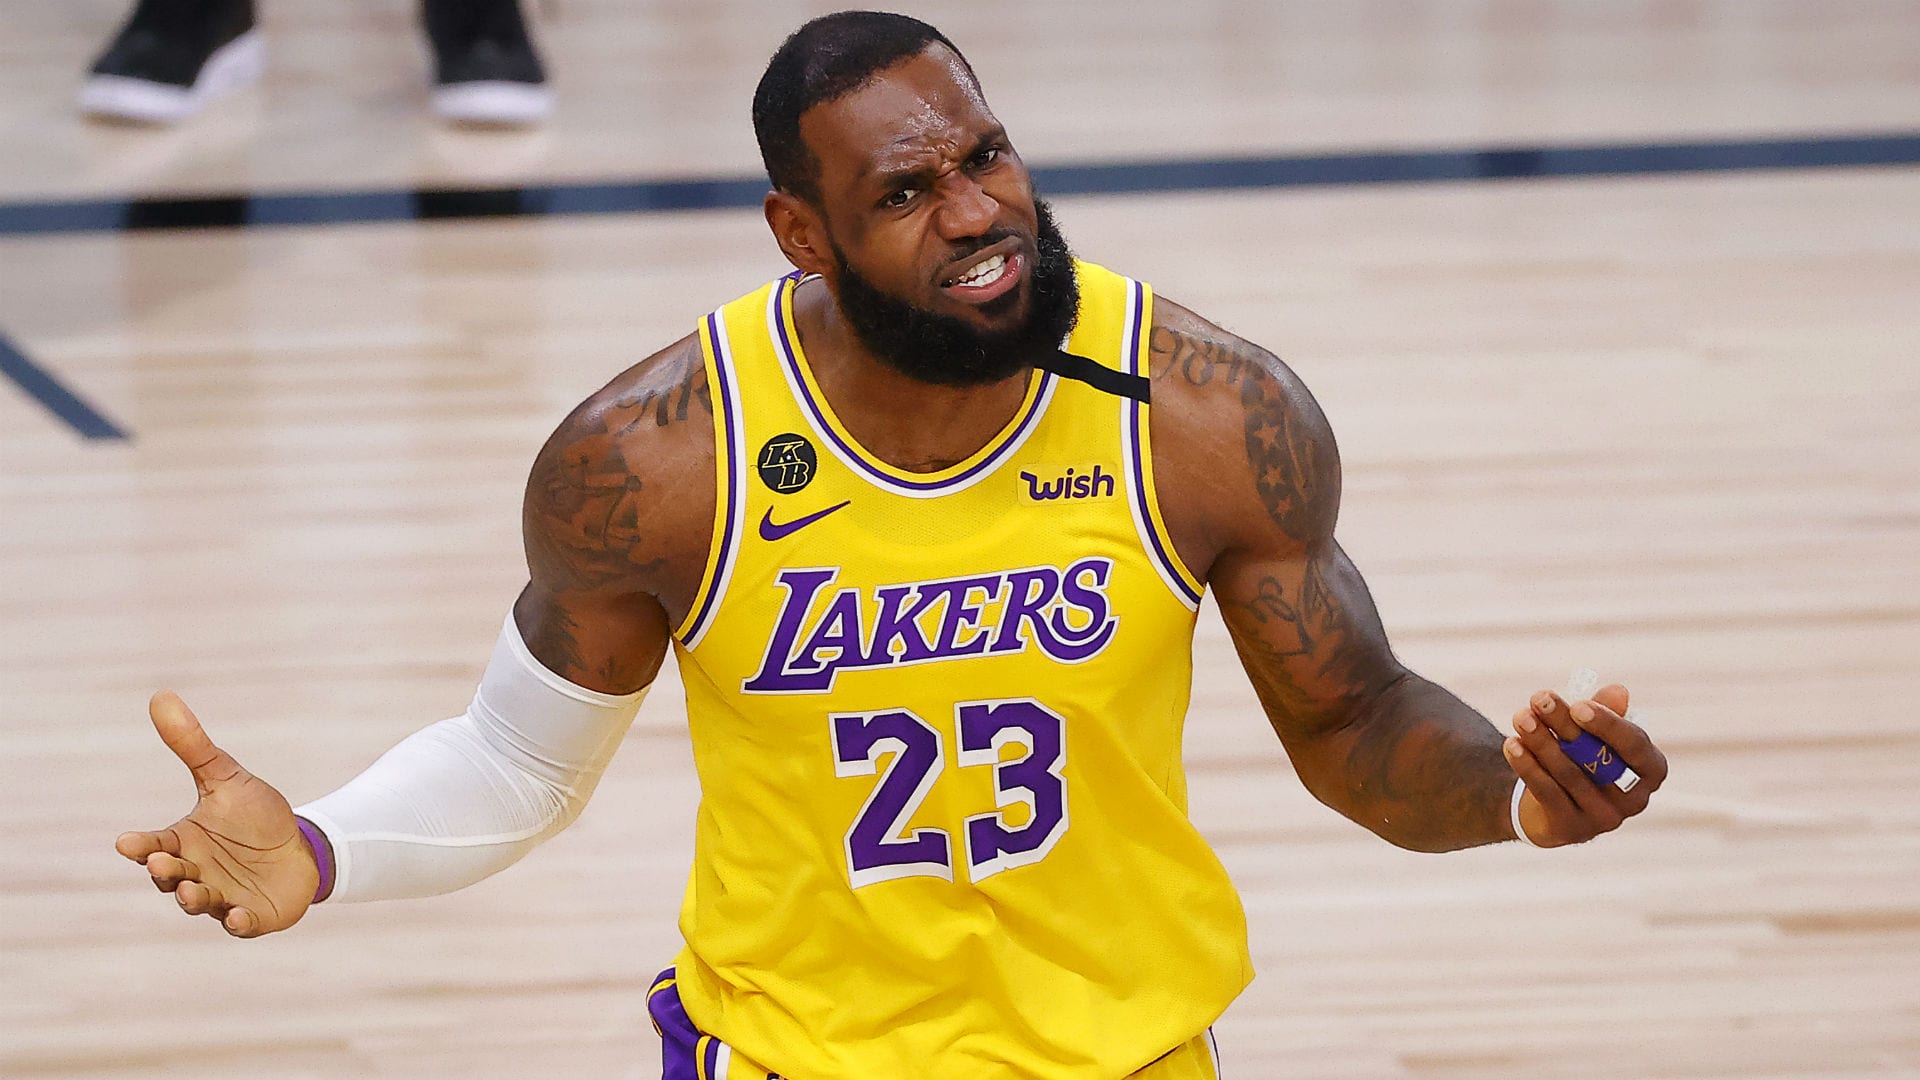 LeBron James of the Lakers